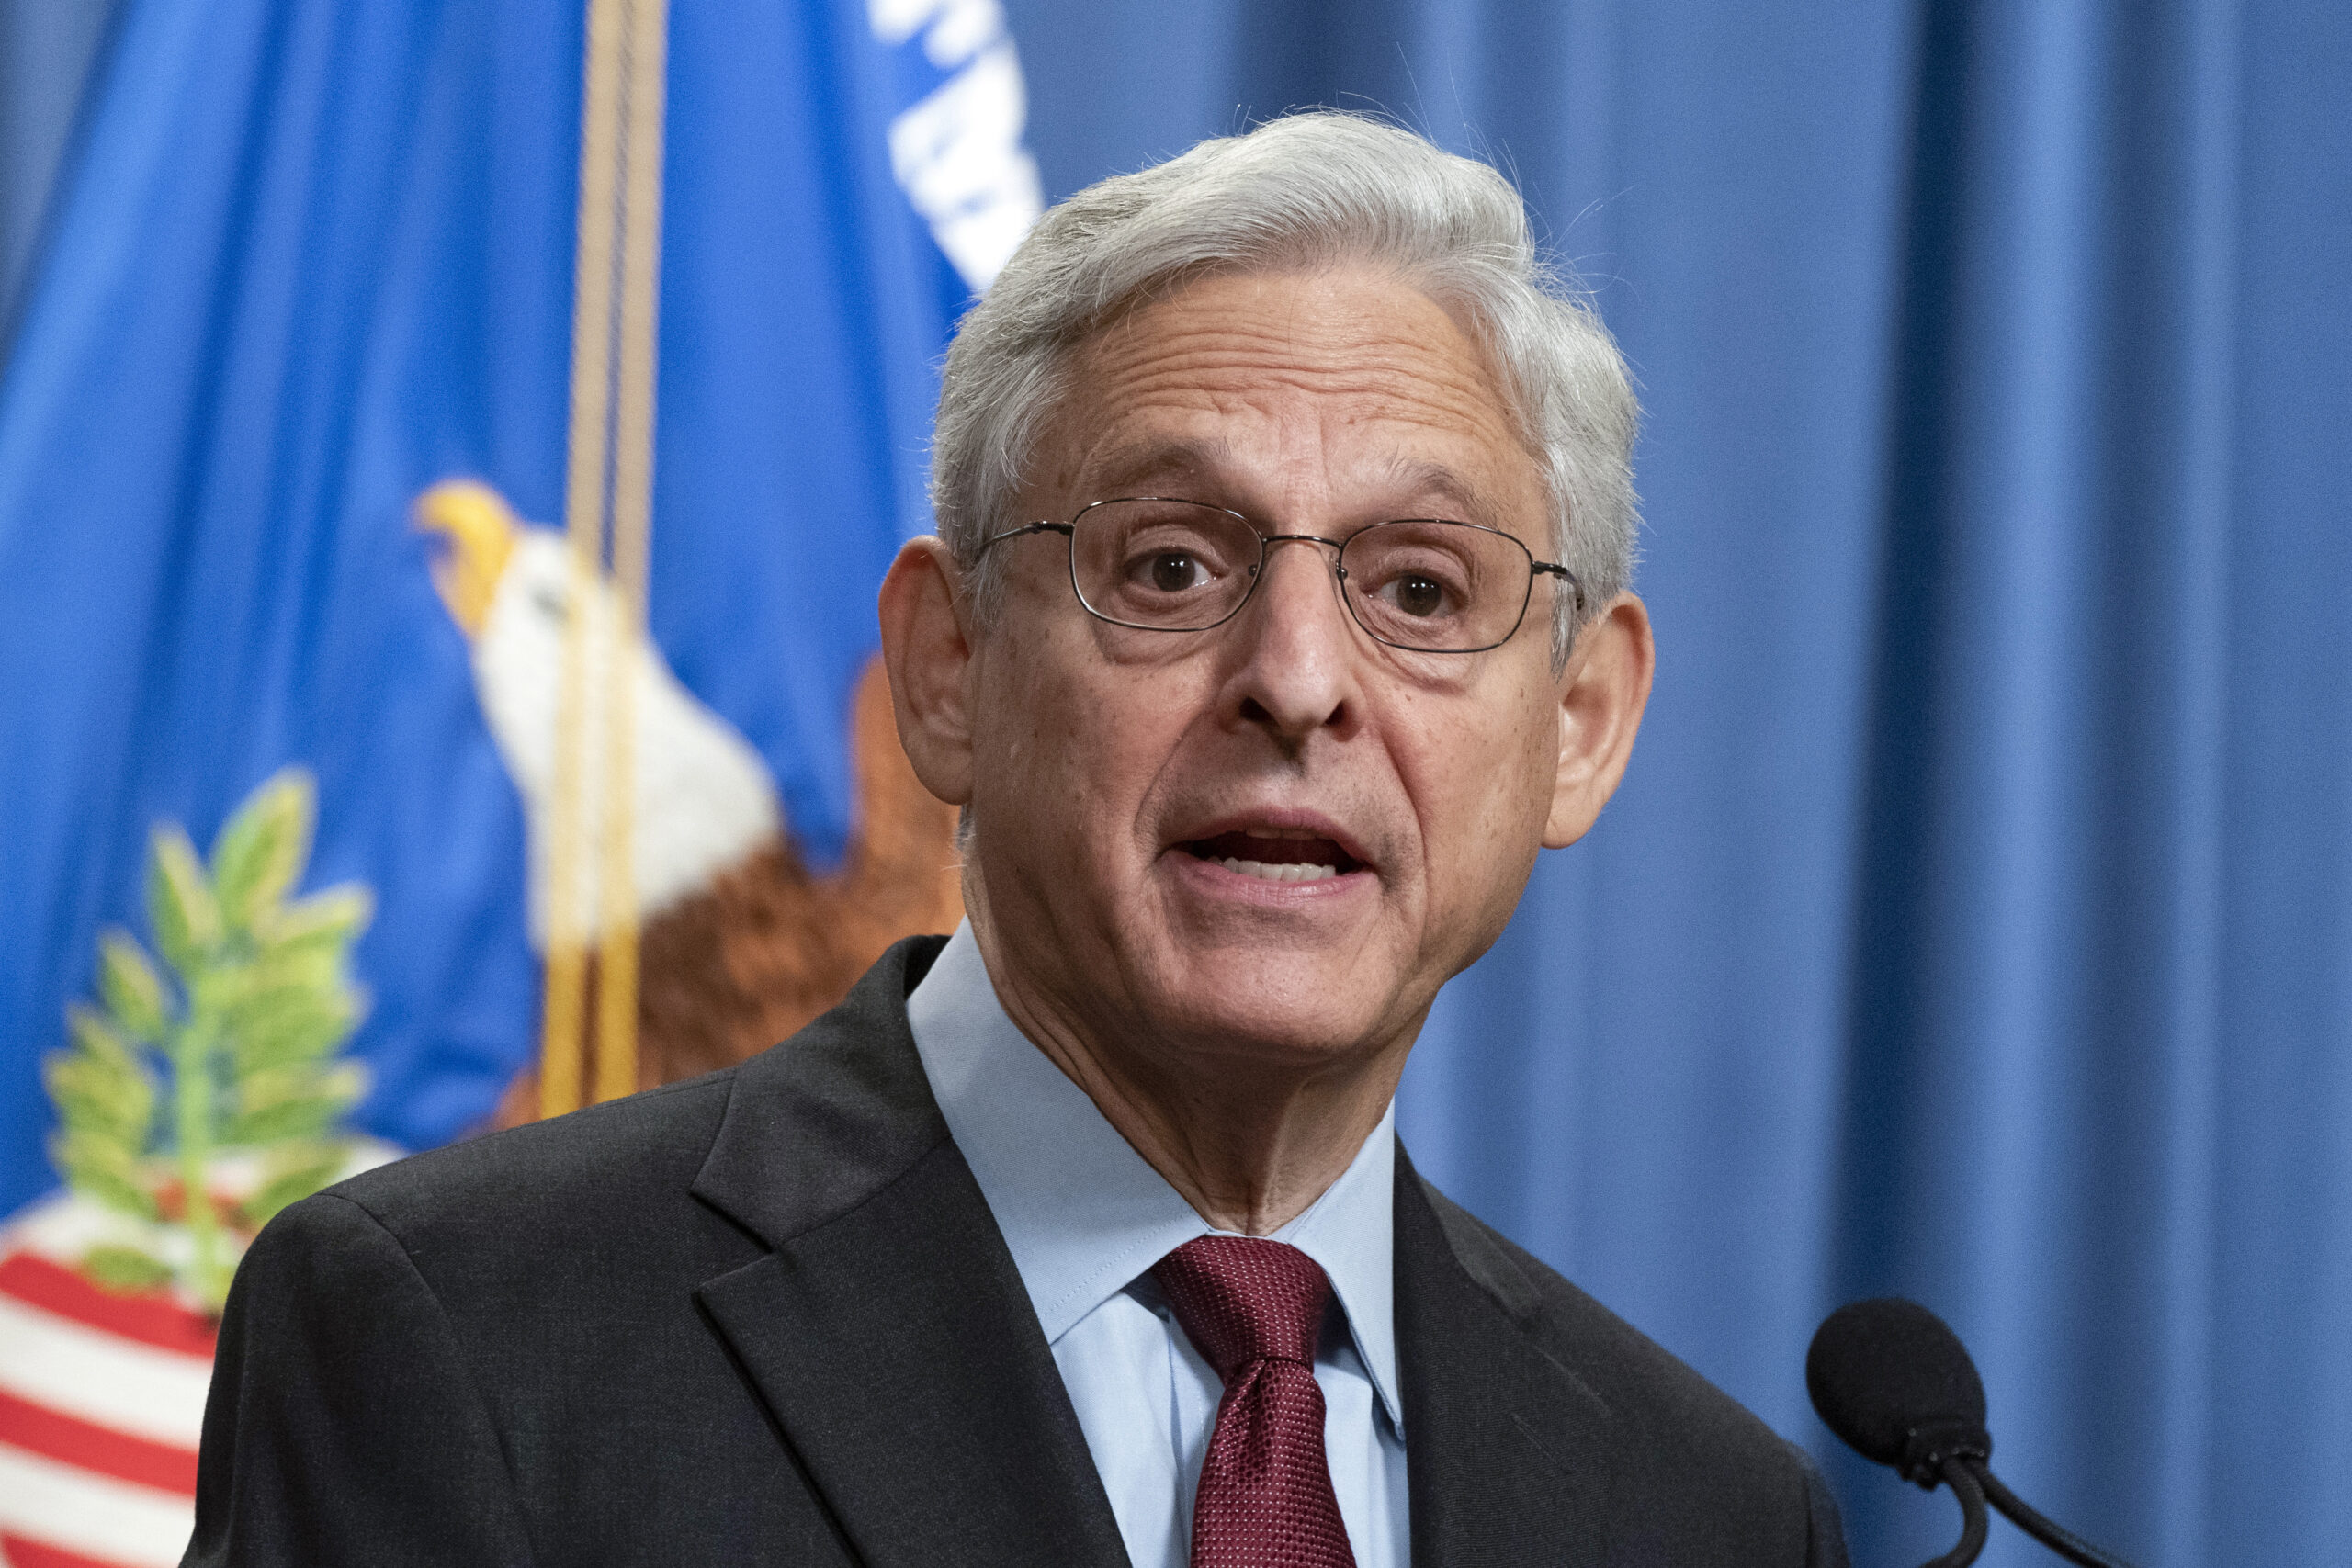 FILE - Attorney General Merrick Garland speaks during a news conference at the Department of Justice in Washington, Aug. 4, 2022. (AP Photo/Manuel Balce Ceneta, File)